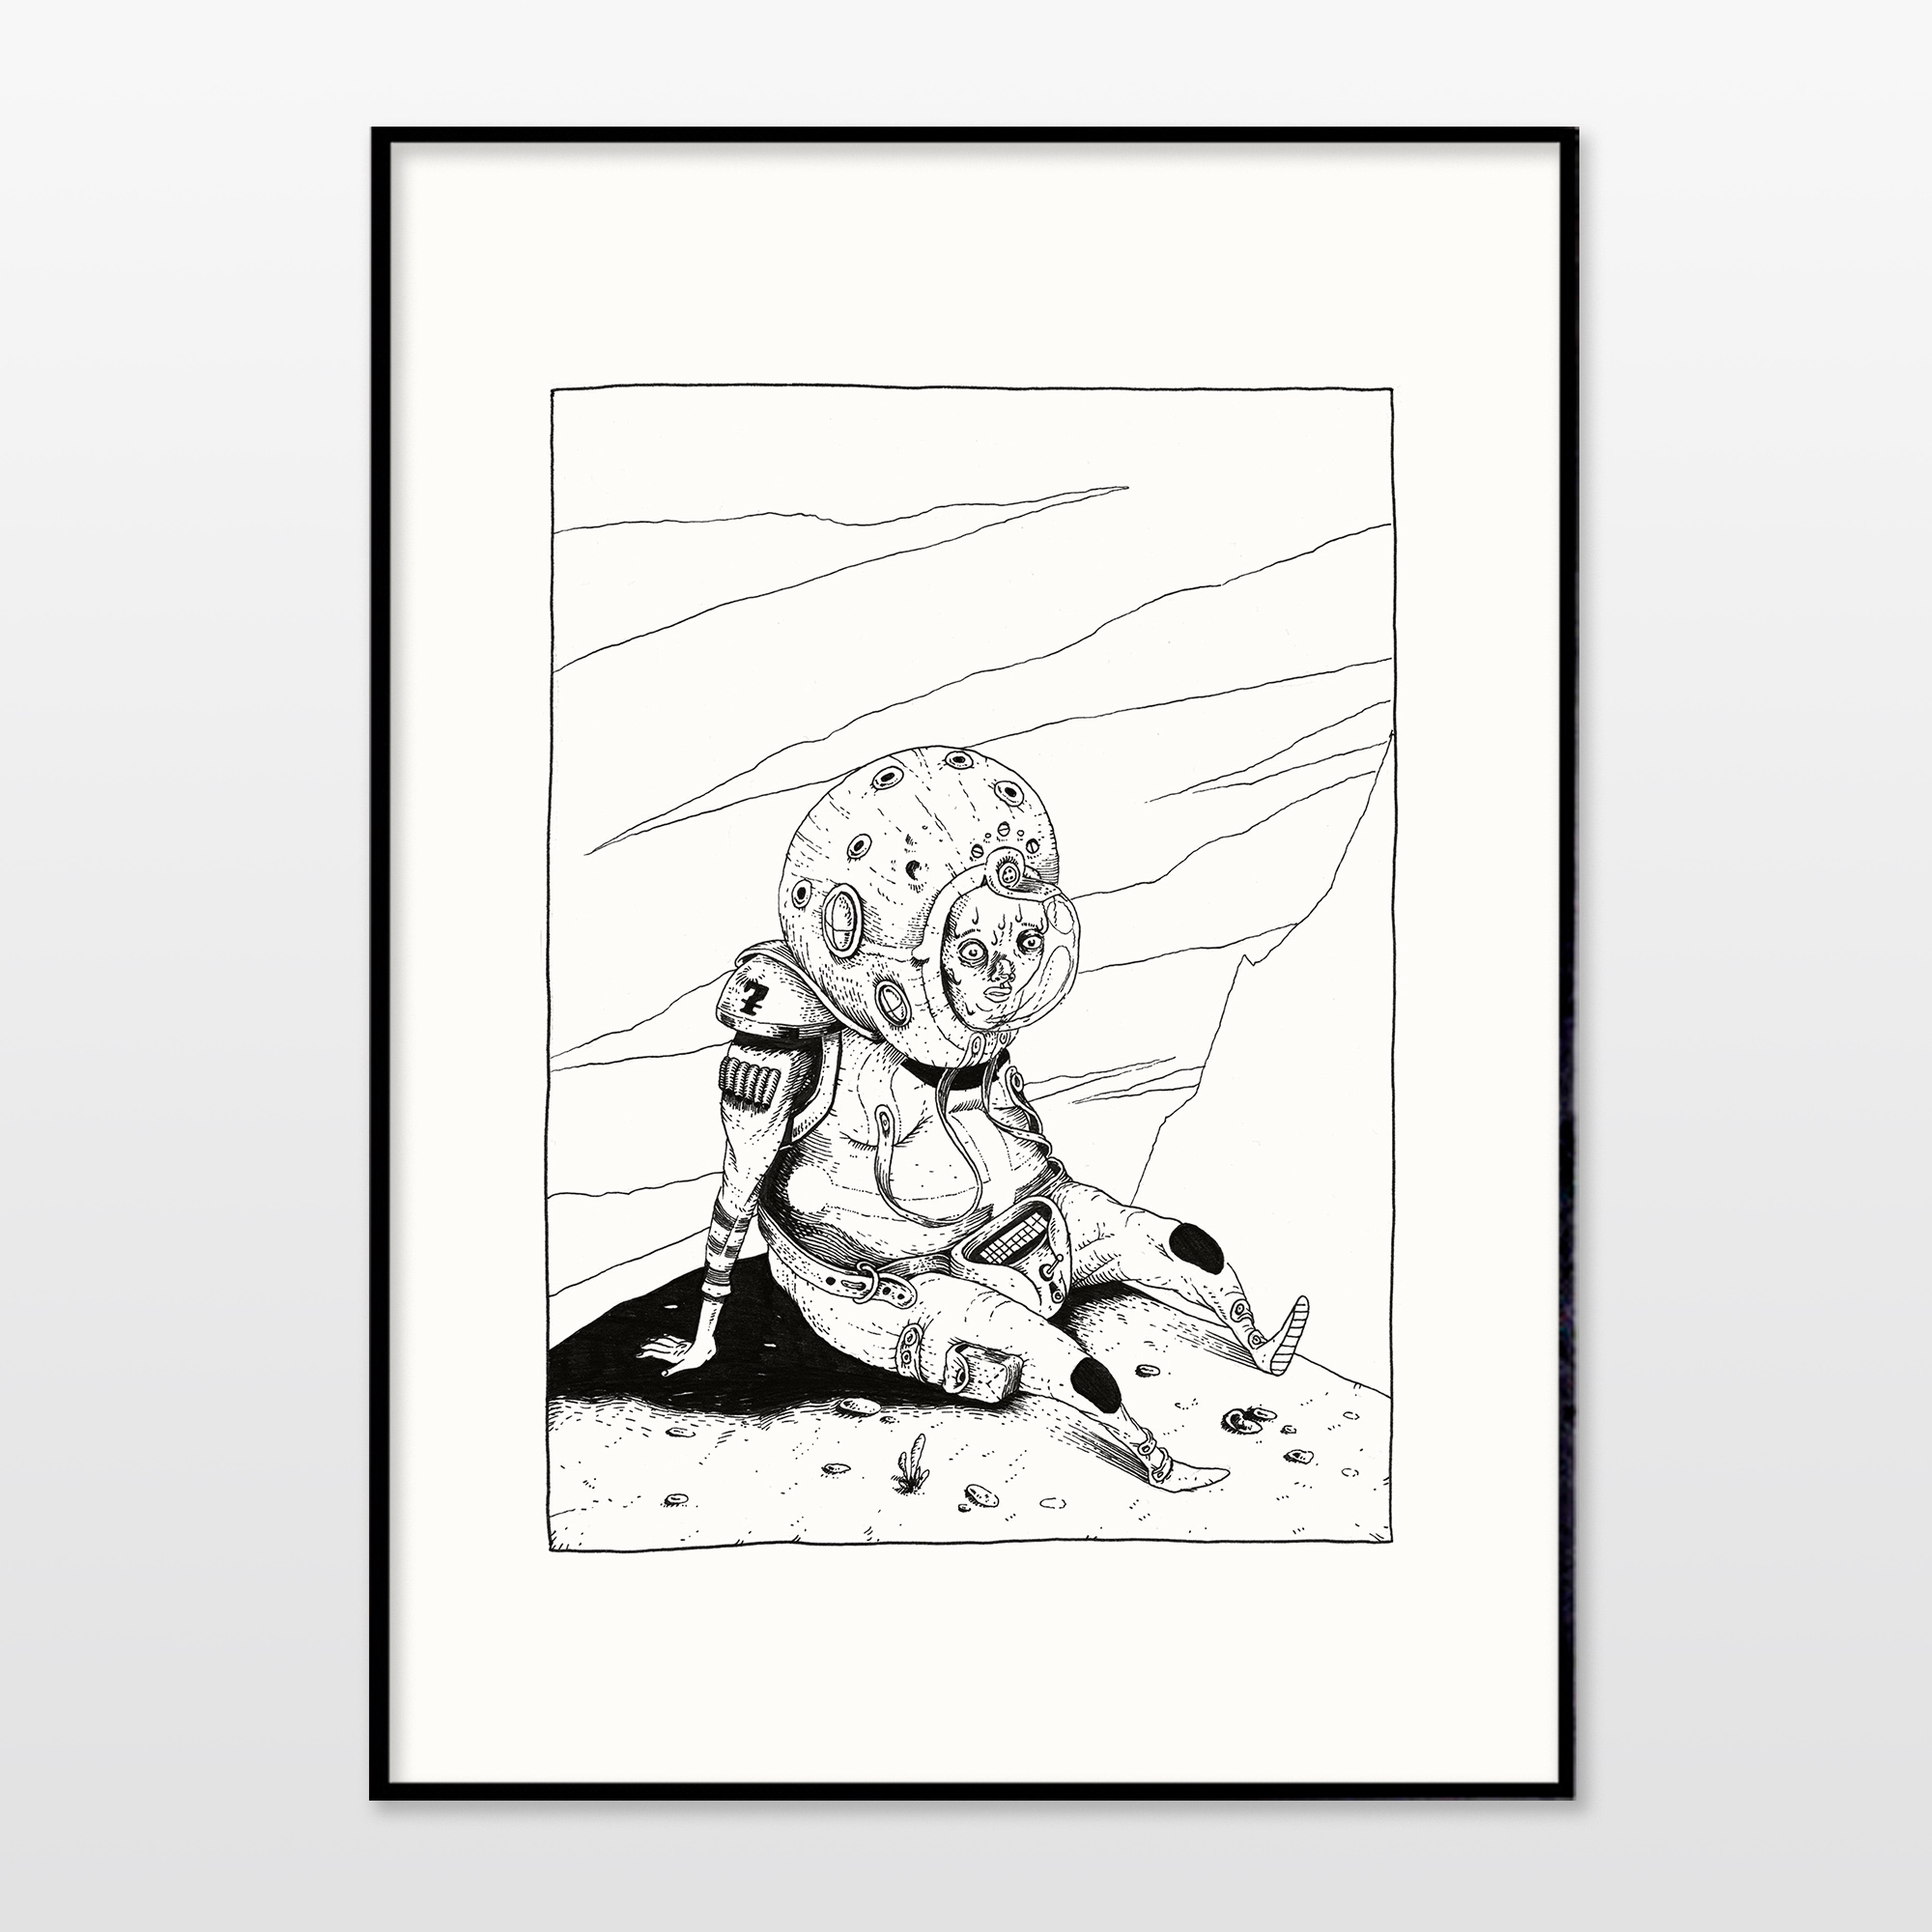 posters-prints, giclee-print, family-friendly, graphical, landscape, monochrome, children, humor, sky, black, white, ink, paper, amusing, atmosphere, black-and-white, contemporary-art, cute, danish, decorative, design, interior, interior-design, modern, modern-art, nordic, posters, prints, Buy original high quality art. Paintings, drawings, limited edition prints & posters by talented artists.